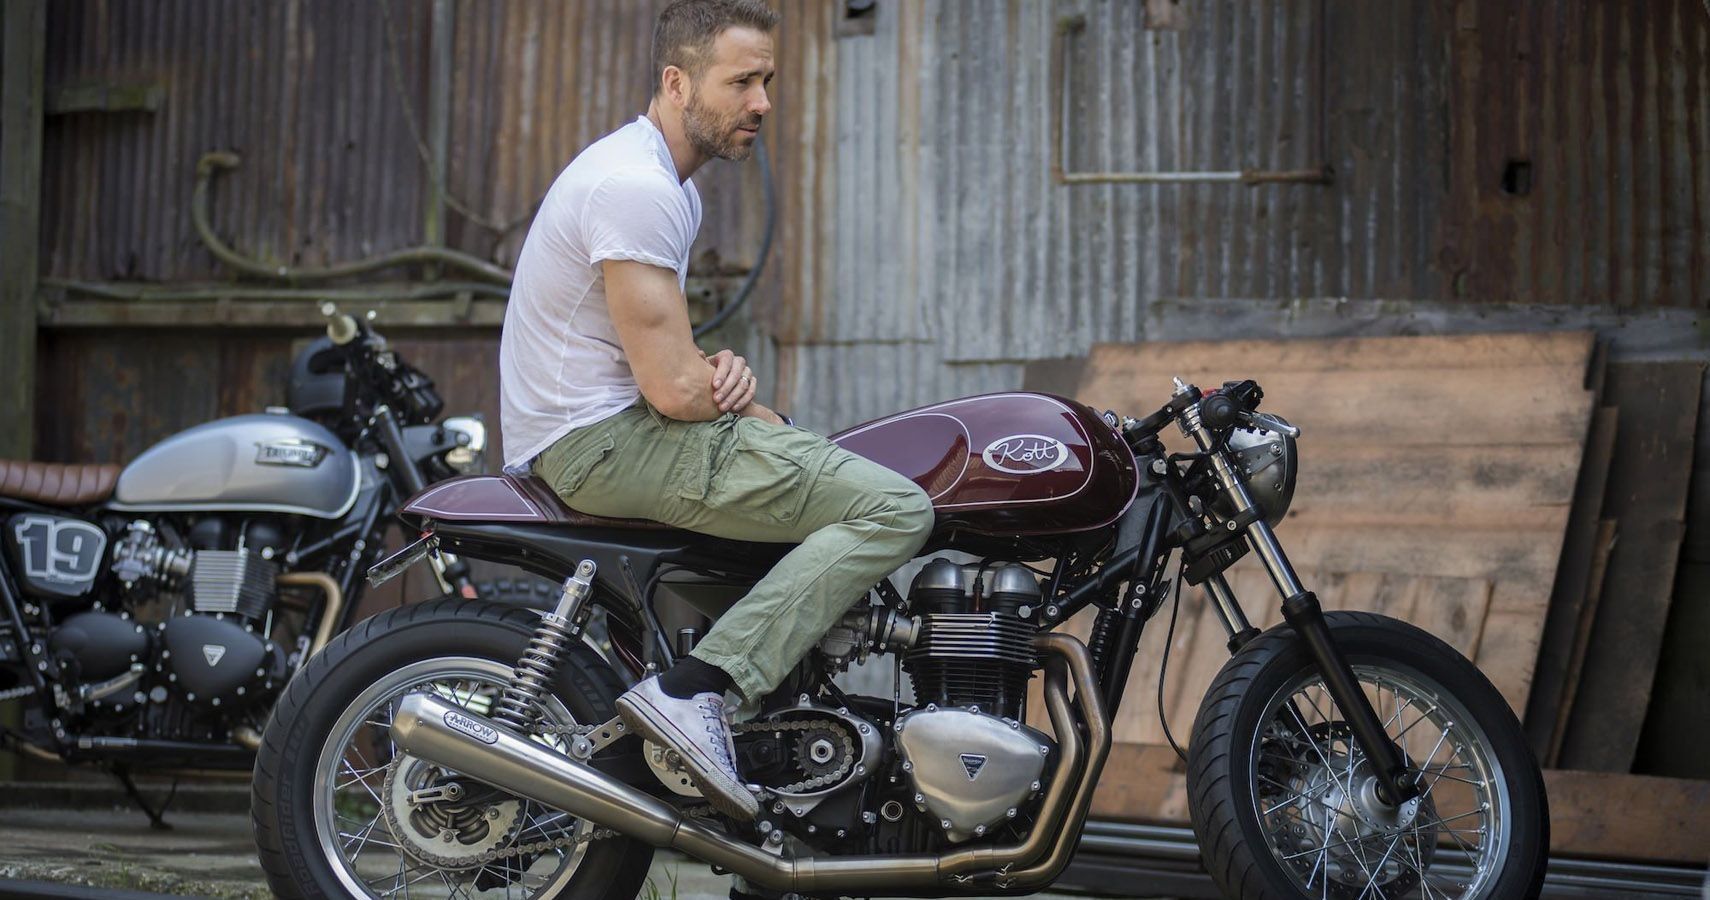 These Are The 8 Coolest Motorcycles In Ryan Reynolds' Collection